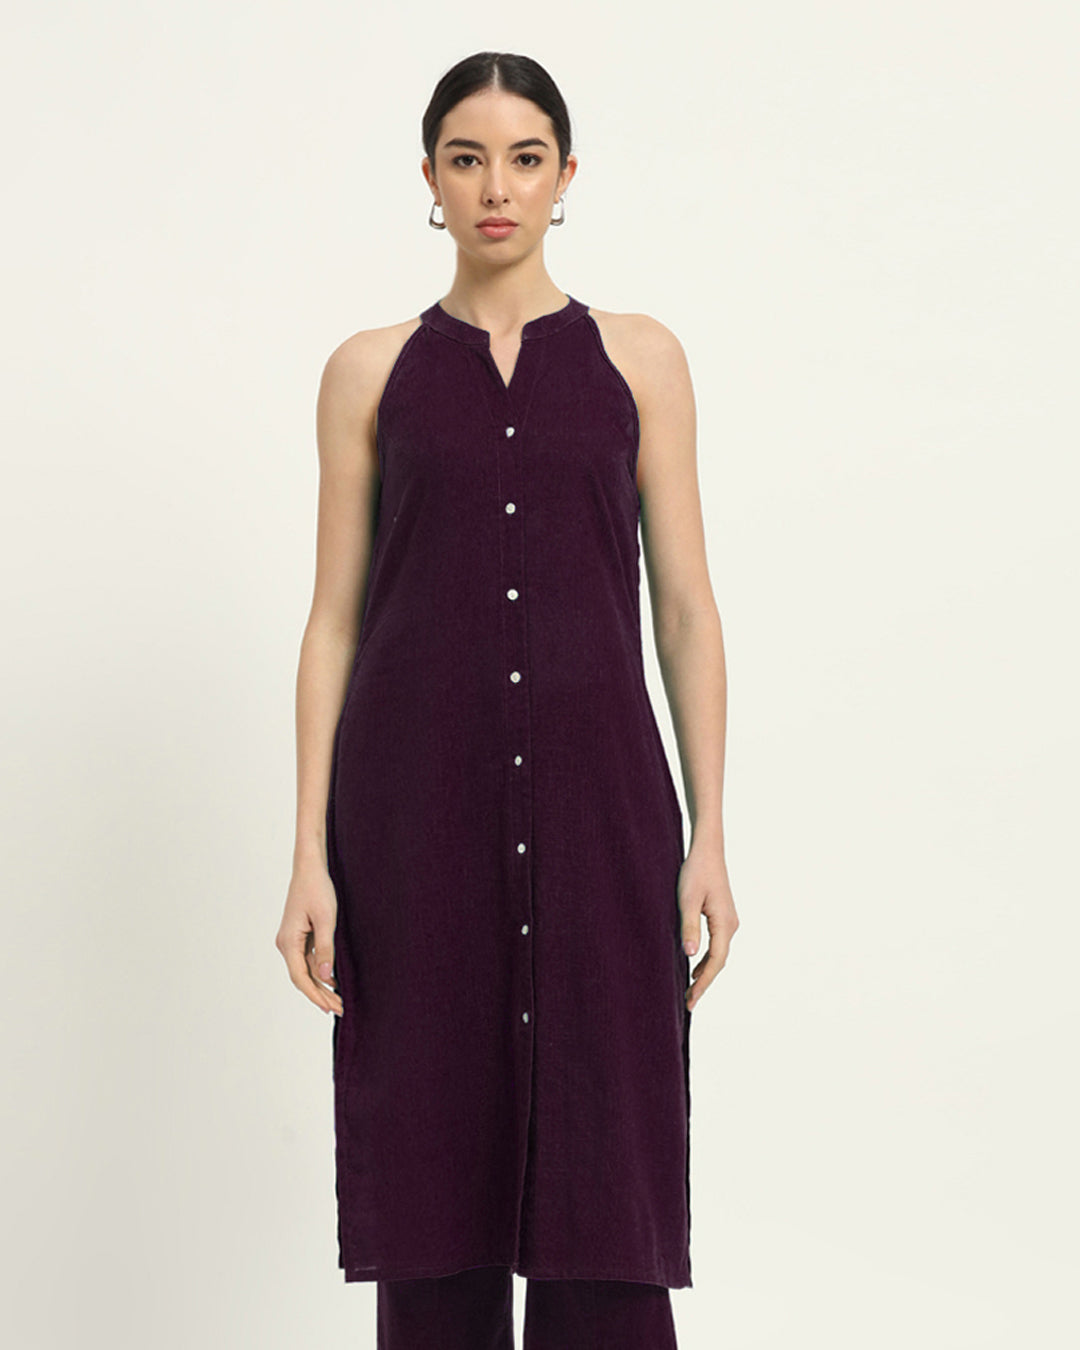 Plum Passion Mermaid Button Down Solid Kurta (Without Bottoms)